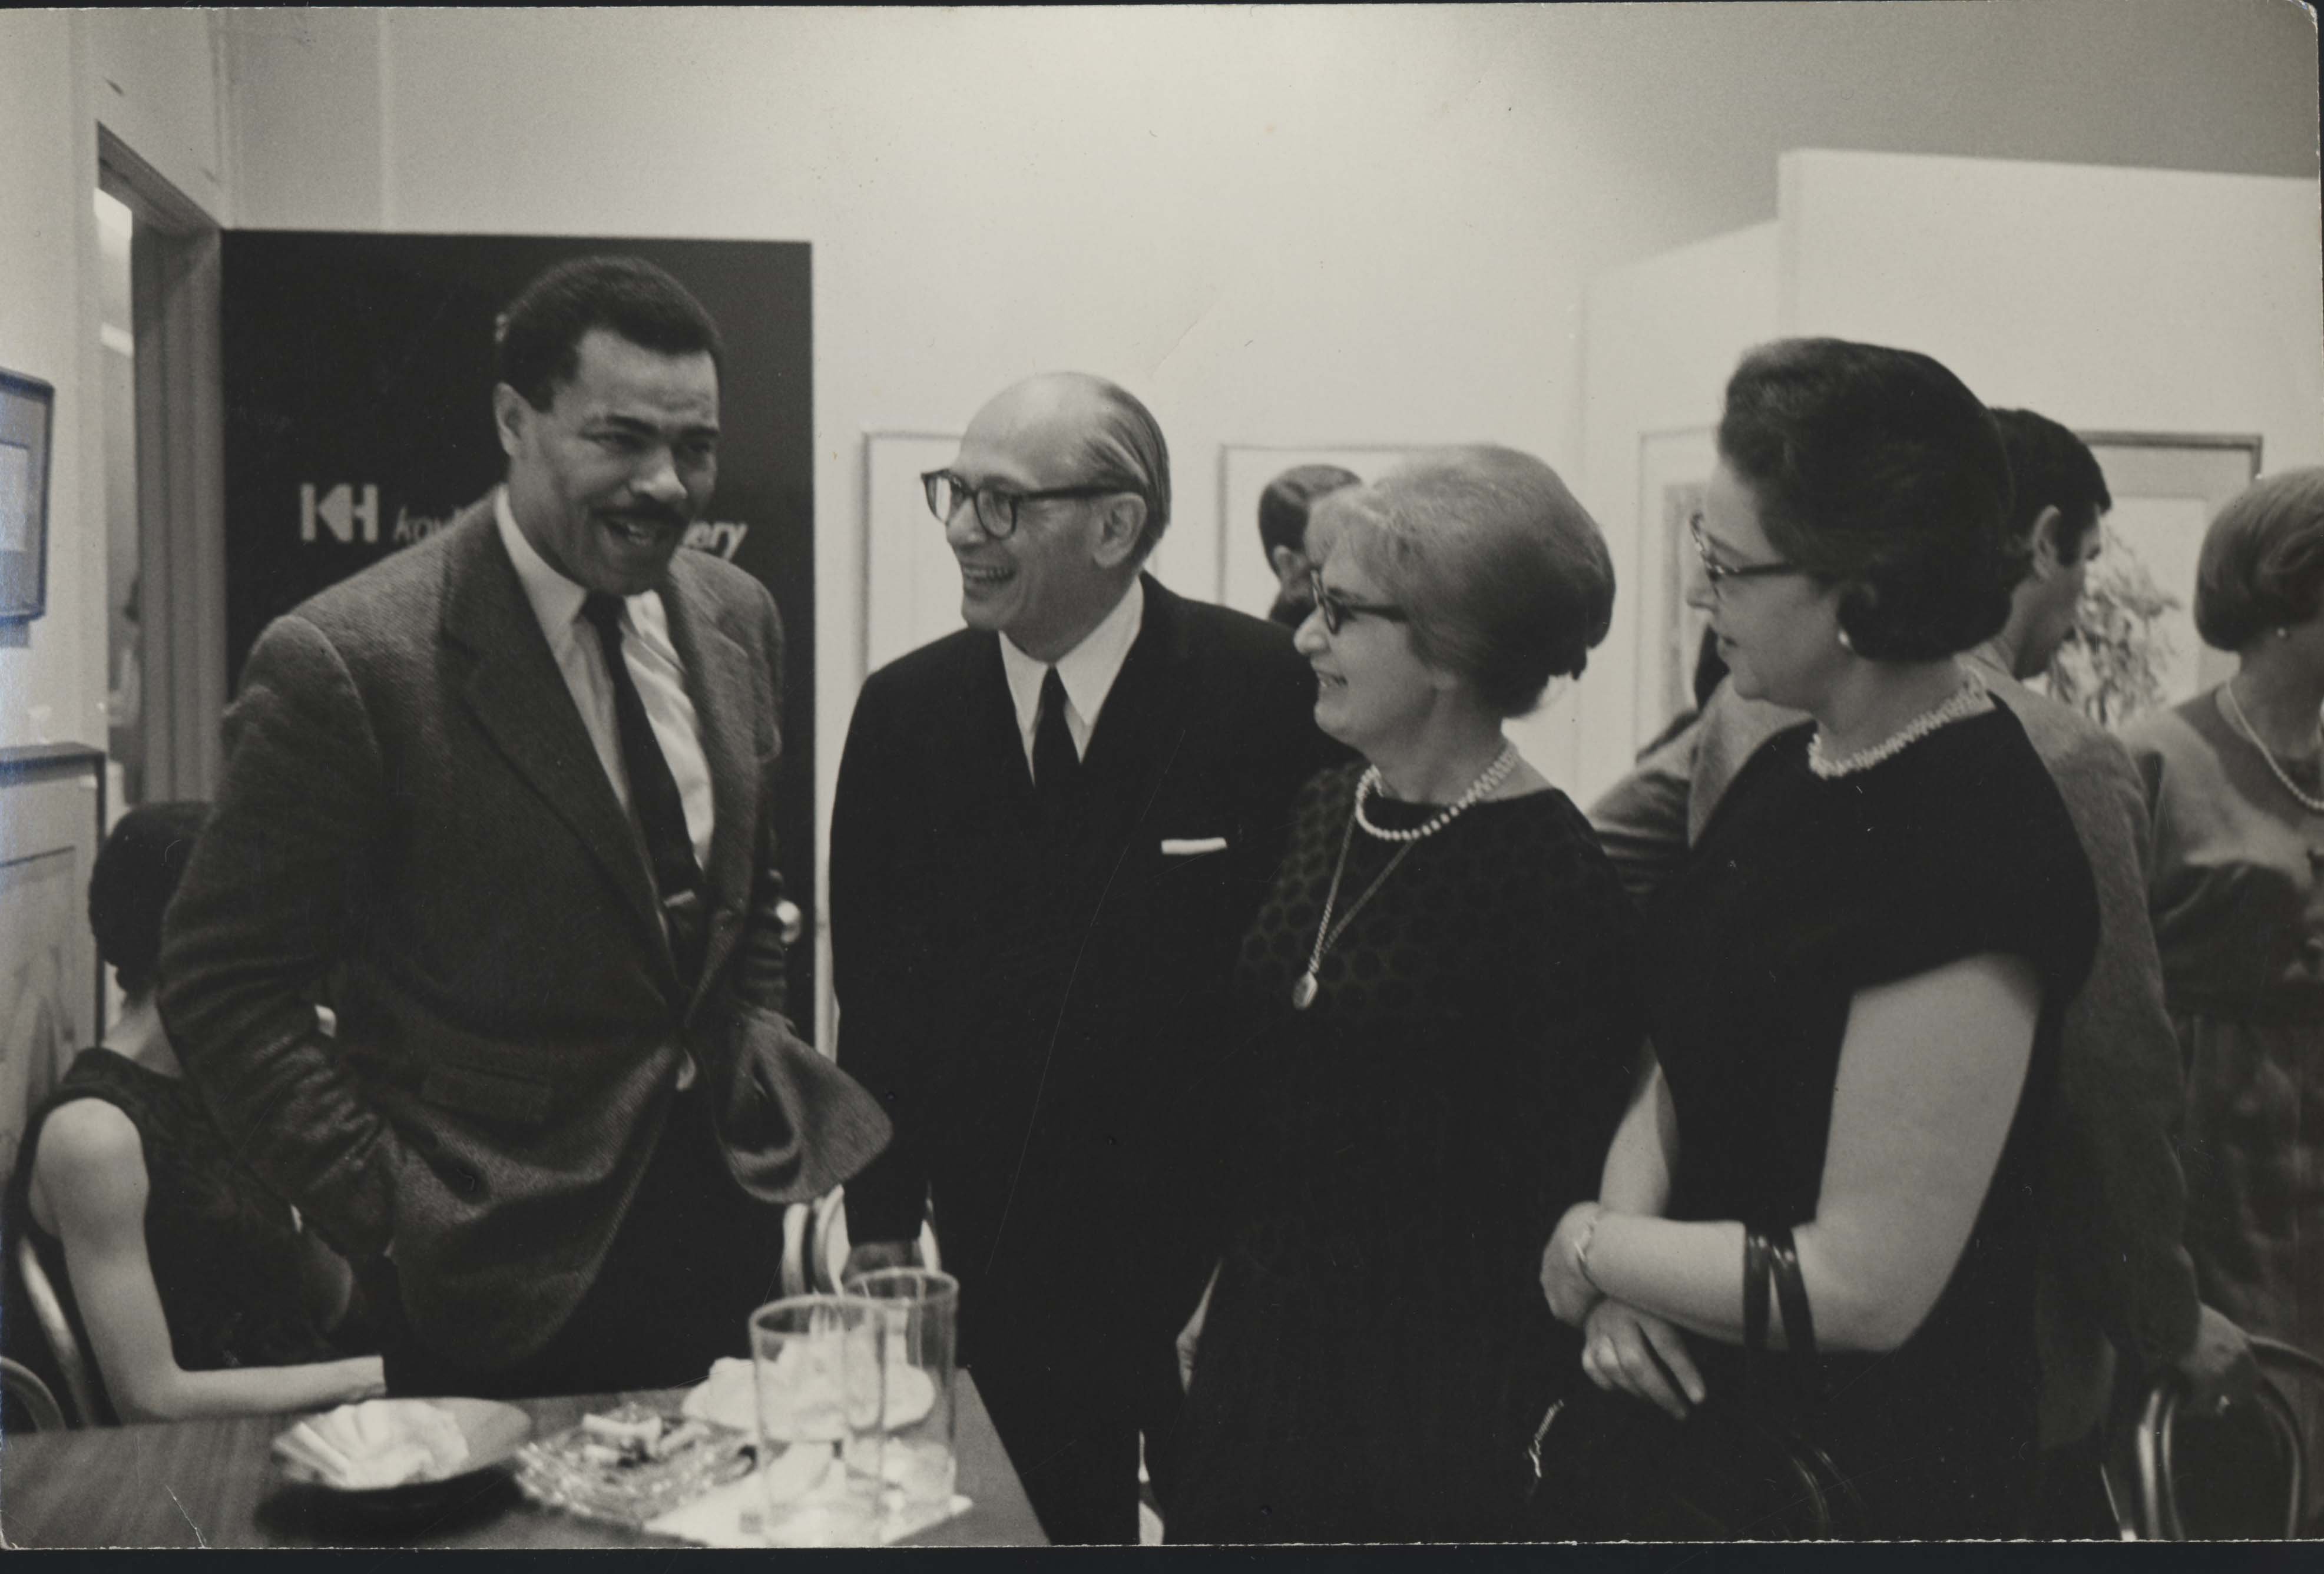 Photograph of Paul Moses and others from his lecture on Matisse, 1966